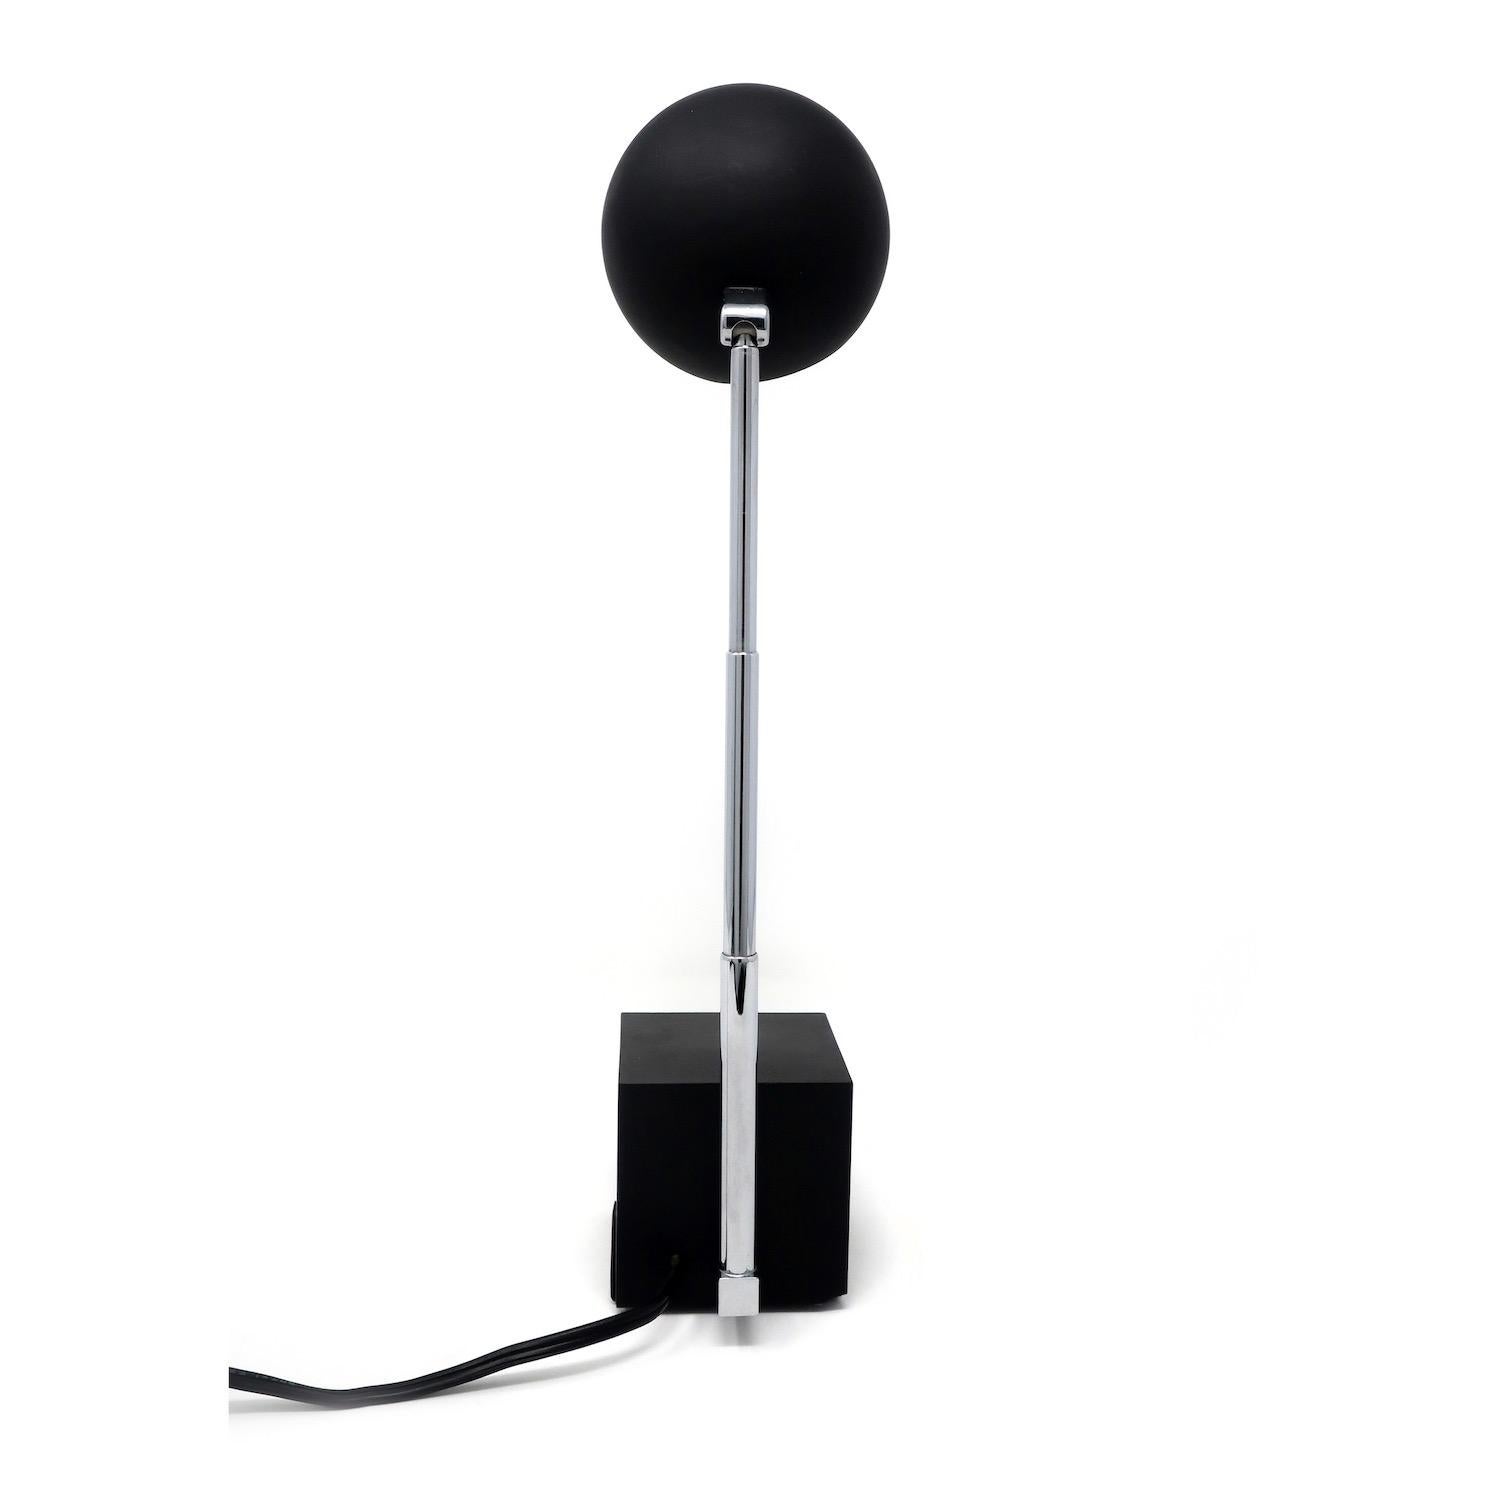 A Mid-Century Modern Lytegem desk/task lamp by Michael Lax for Lightolier (1965) with a black base and shade and extendable chrome stem, with switch for two light intensities. Can be found in the permanent collection of the Museum of Modern Art